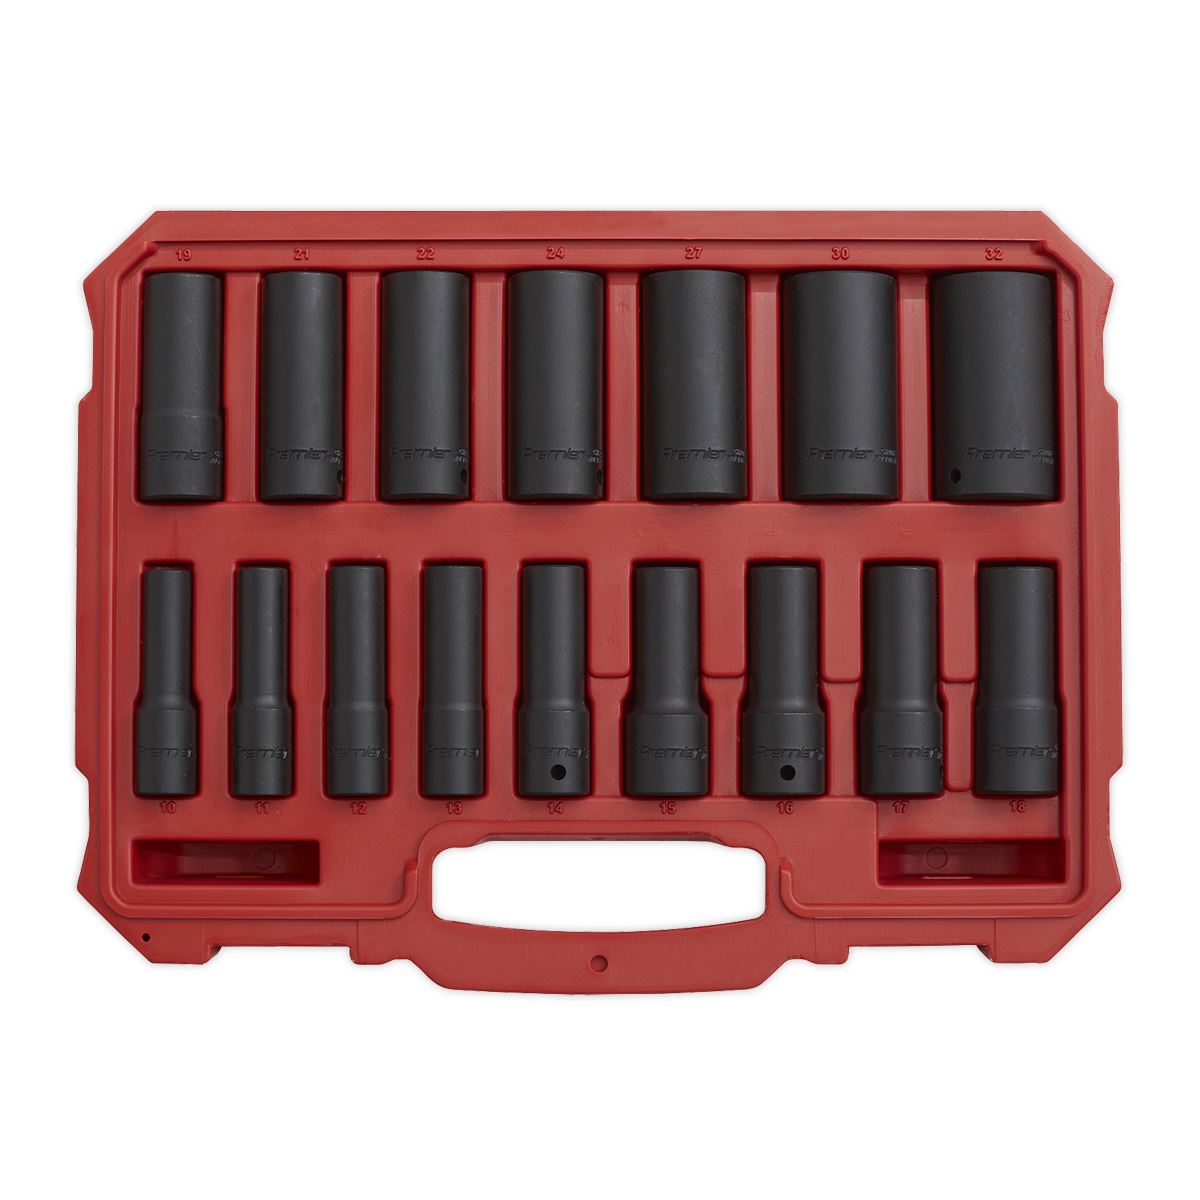 Sealey Premier 16 Piece 1/2" Drive Deep Lock On Impact Socket Set 10-32mm Rounded